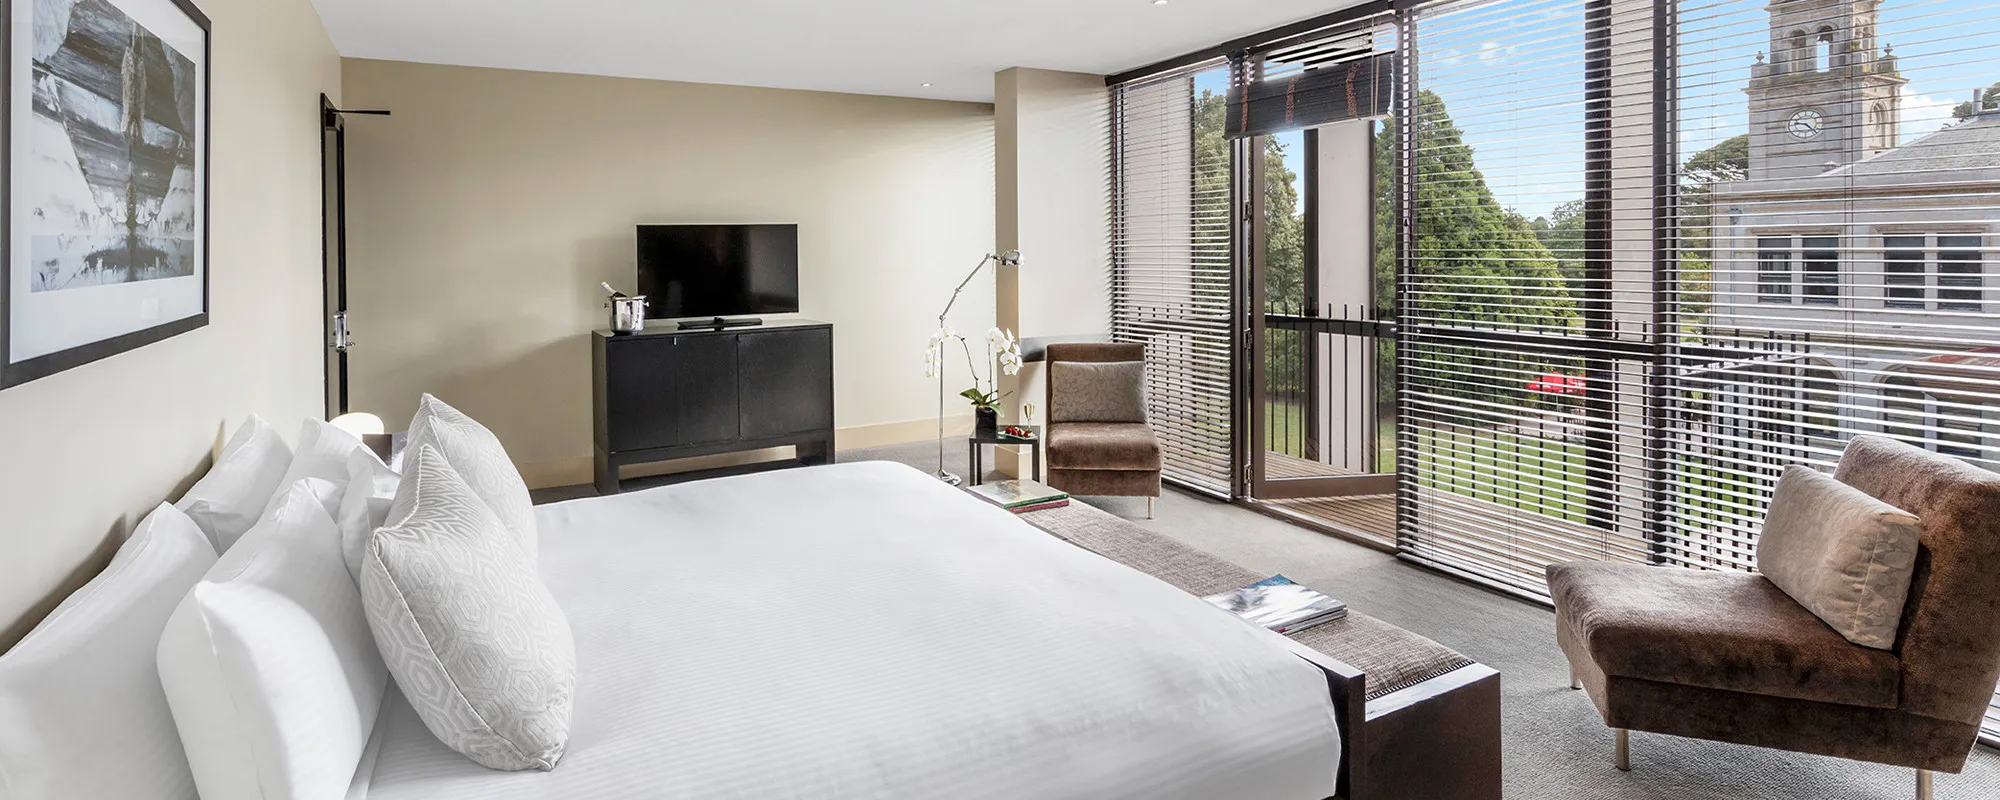 Lancemore Mansion Hotel Werribee Park Boutique Luxury Accommodation Two Bedroom 2000 x 800 2